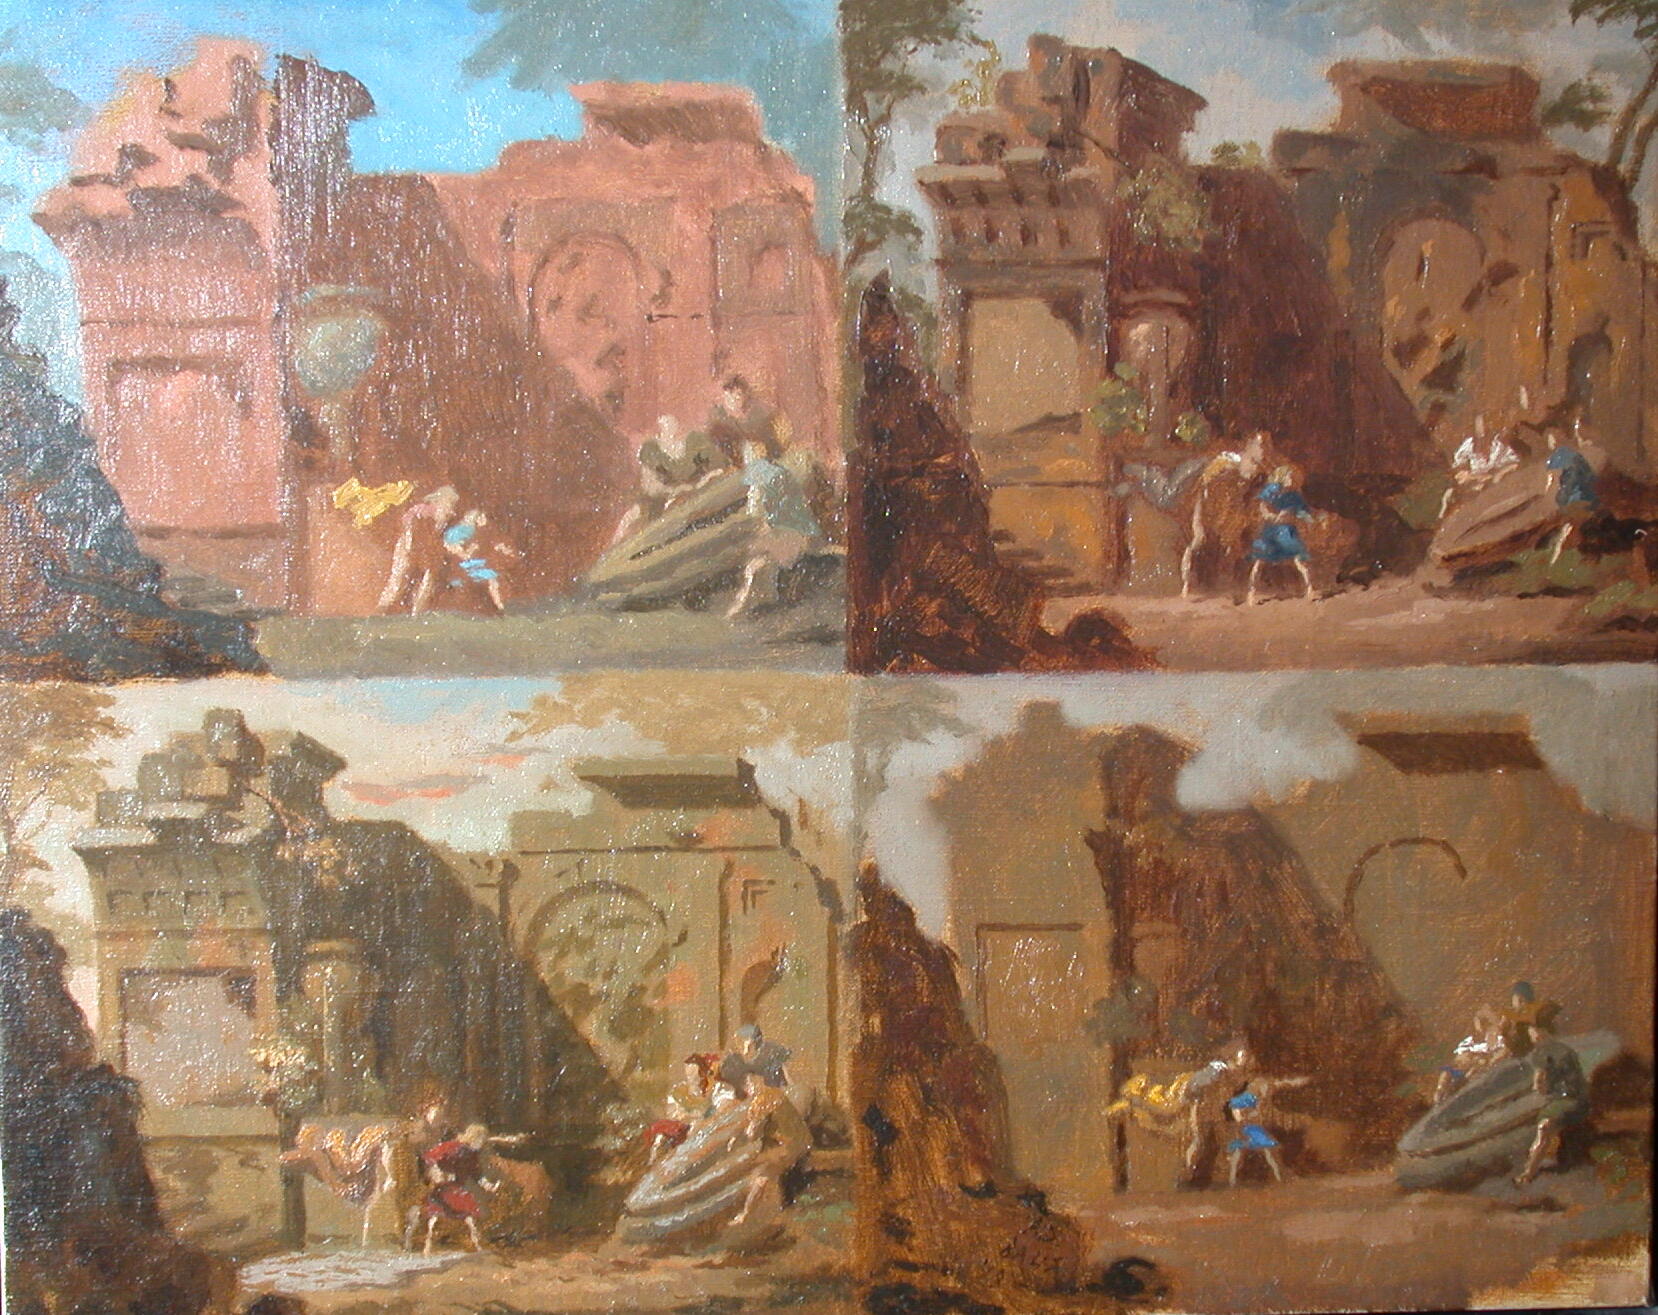 A grid of four depictions of the same scene with slightly different coloring. Outside a sculpted wall, two people hunch over, looking toward three people at a stone disk. In a black frame.